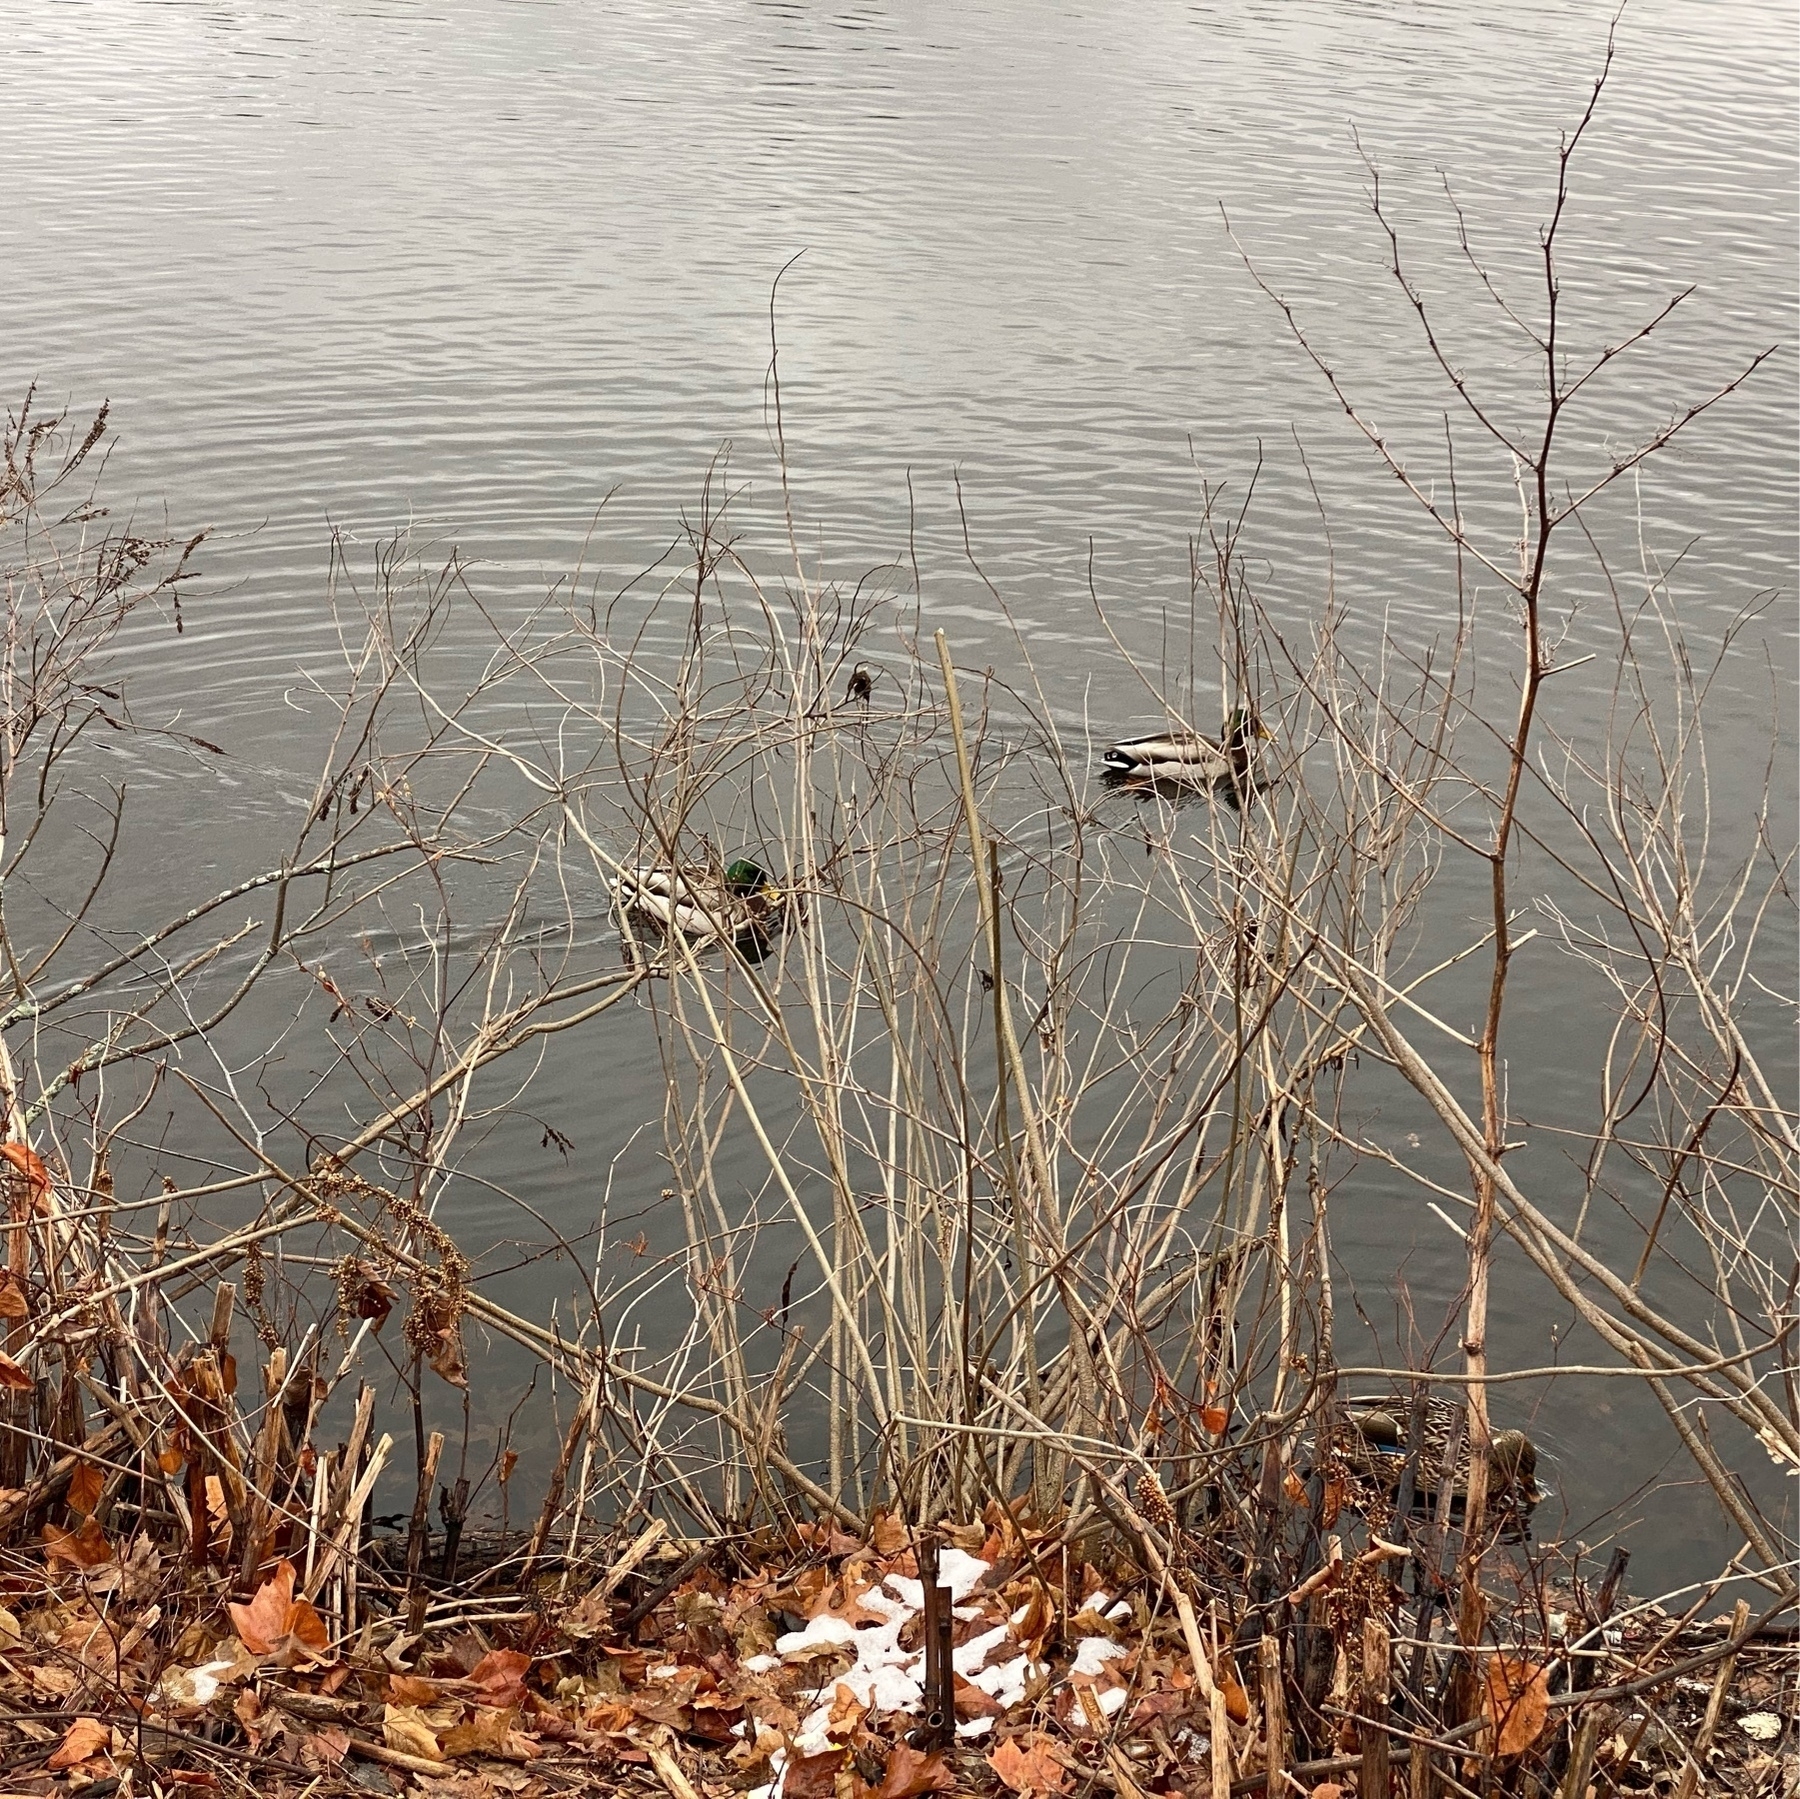 Ducks swimming near the bank behind dry reeds.